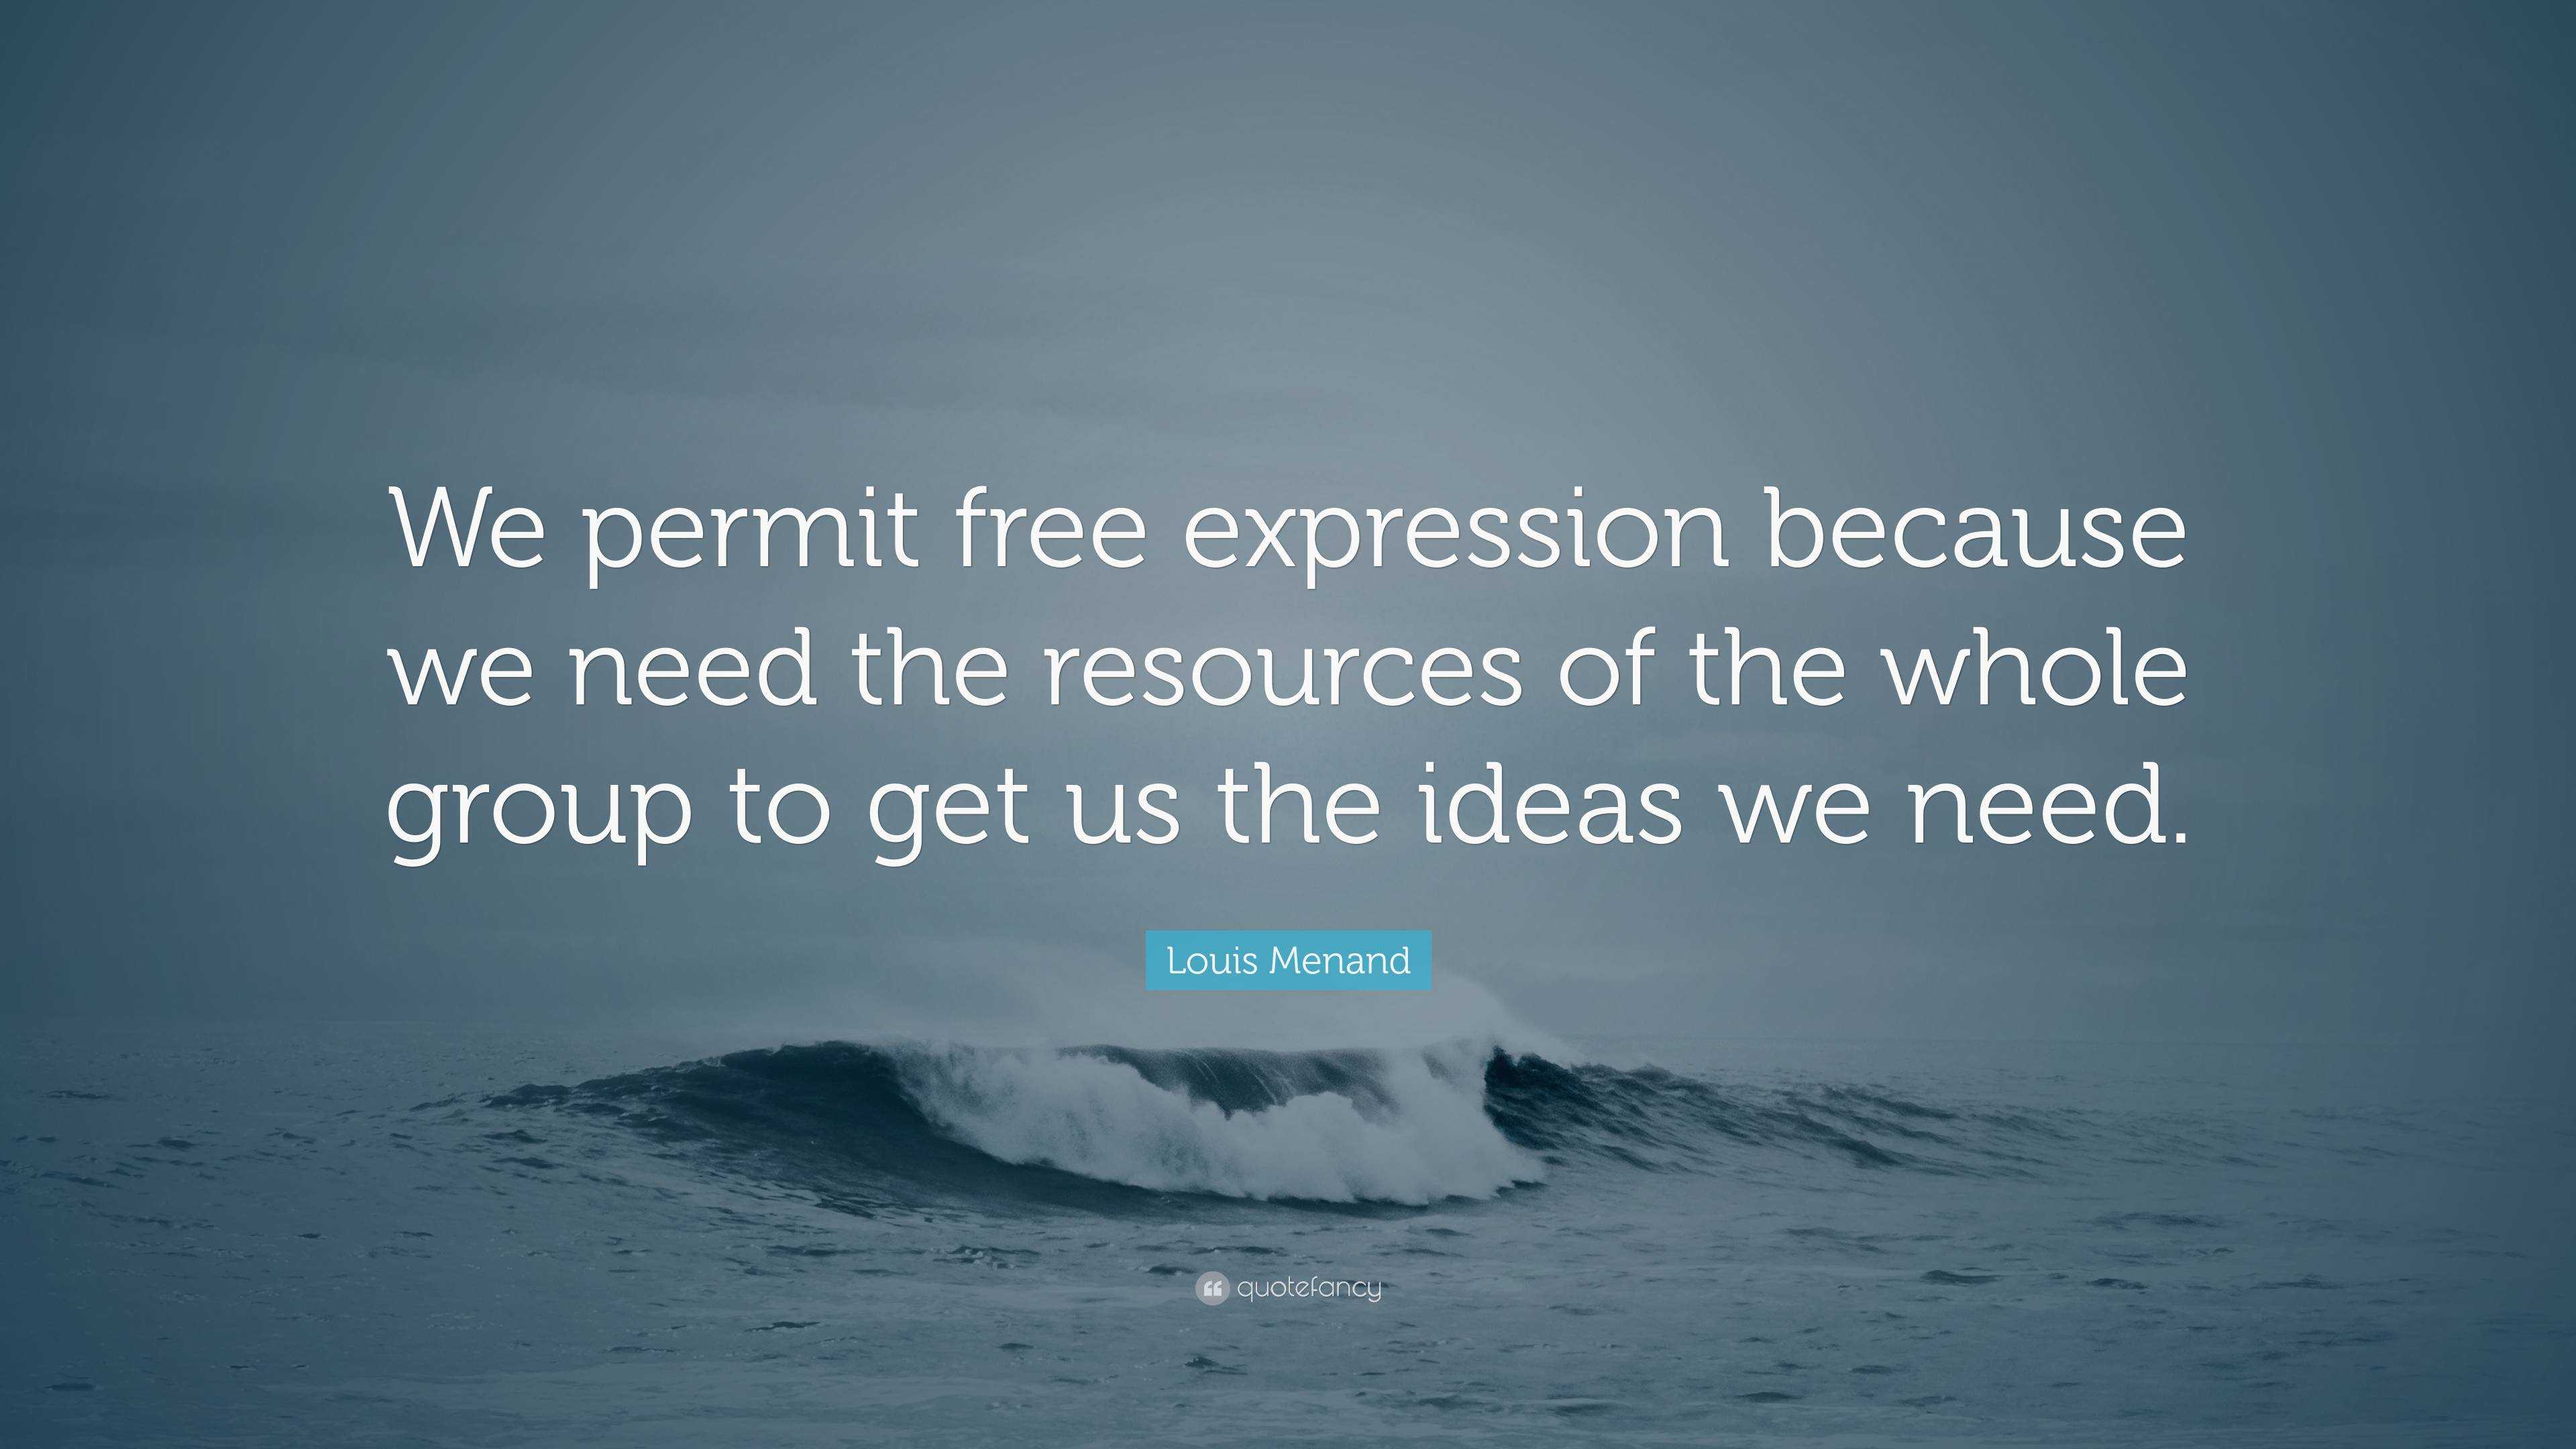 Louis Menand Quote: “We permit free expression because we need the  resources of the whole group